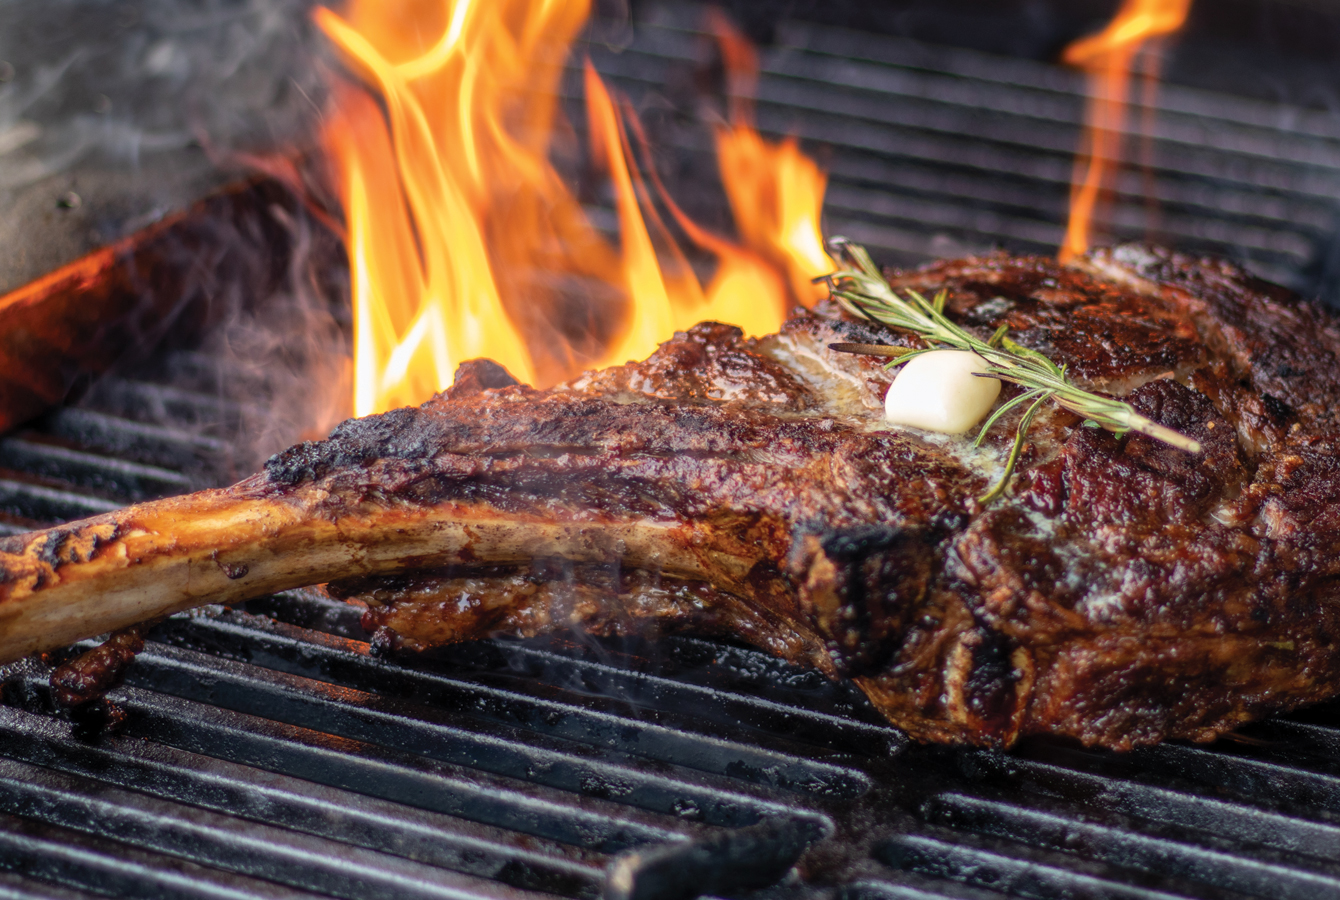 A Tomahawk Steak on the grill, flames high and searing the meat beautifully.